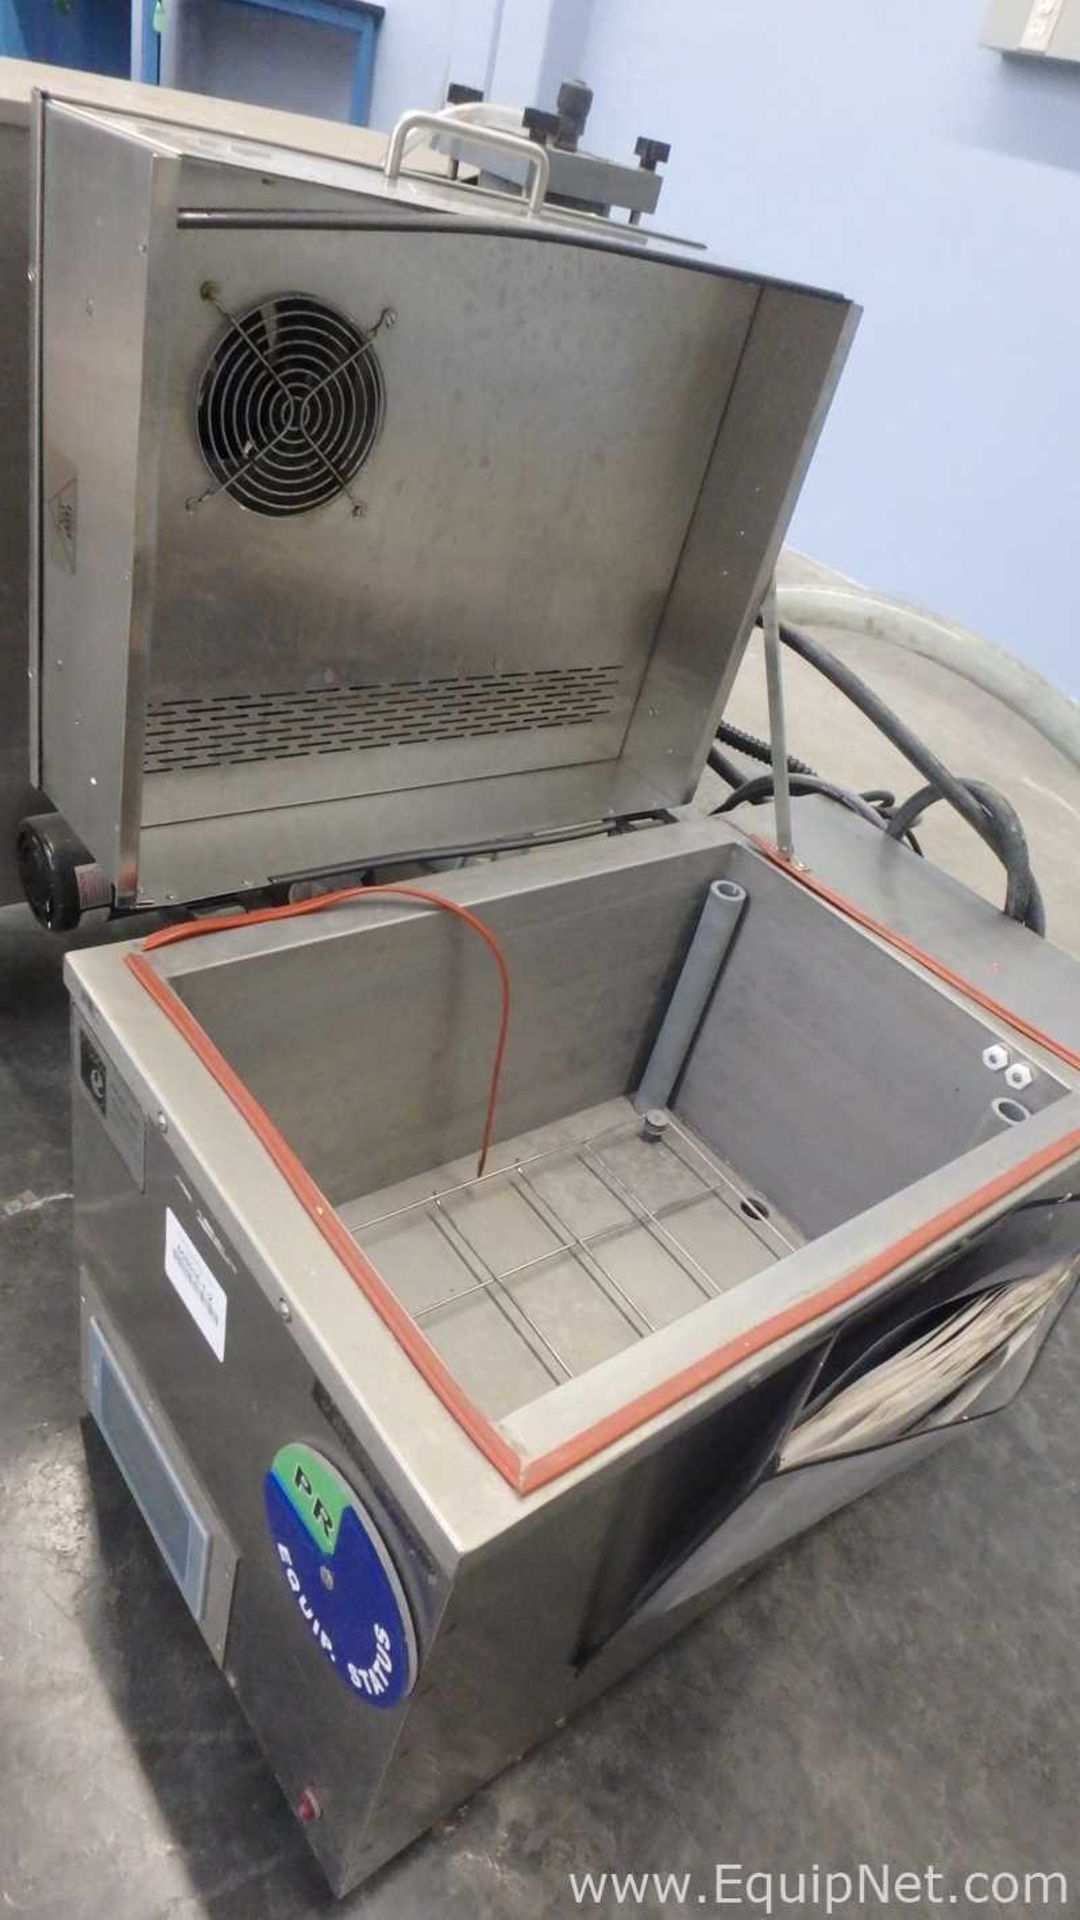 ESMA Inc. E700 Ultrasonic Cleaning System with E997 30Gal Heated Storage Tank - Image 20 of 38